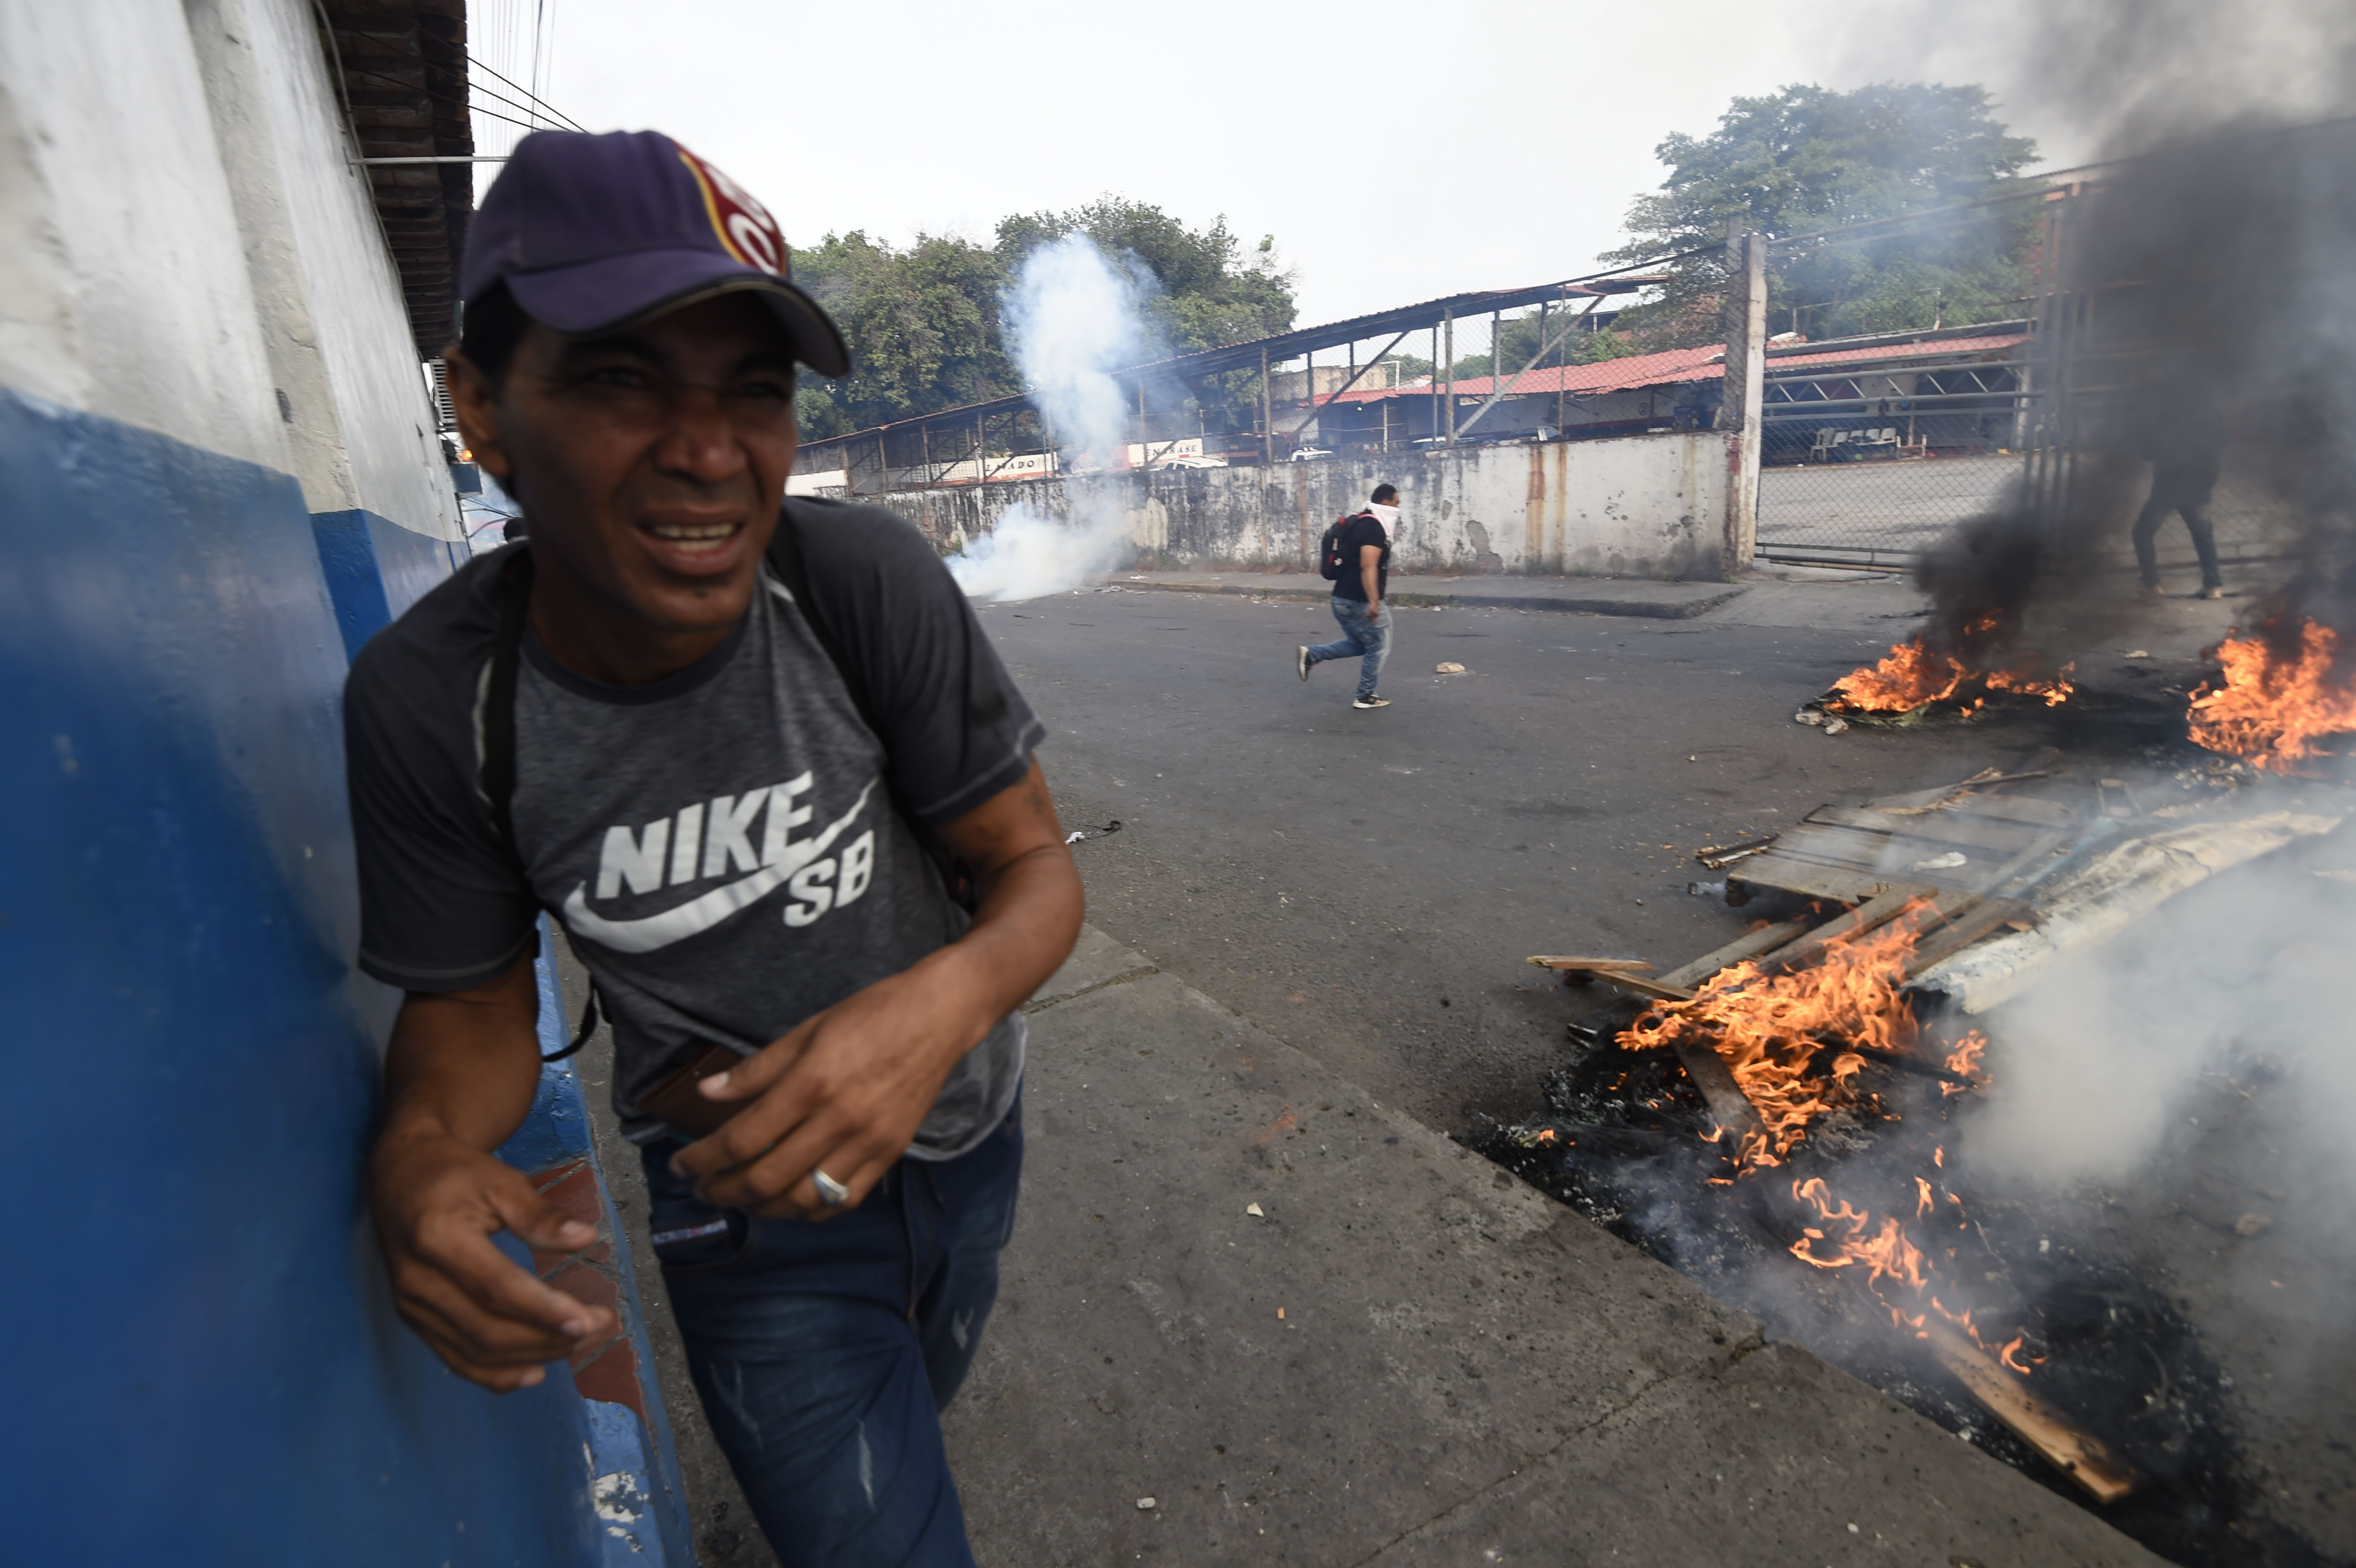 Venezuelans hold a protest in the border city of Ureña, Tachira, after President NIcolas Maduro's government ordered to temporary close down the border with Colombia on February 23, 2019. - Venezuela braced for a showdown between the military and regime opponents at the Colombian border on Saturday, when self-declared acting president Juan Guaido has vowed humanitarian aid would enter his country despite a blockade (Photo by JUAN BARRETO / AFP) (Photo credit should read JUAN BARRETO/AFP/Getty Images)